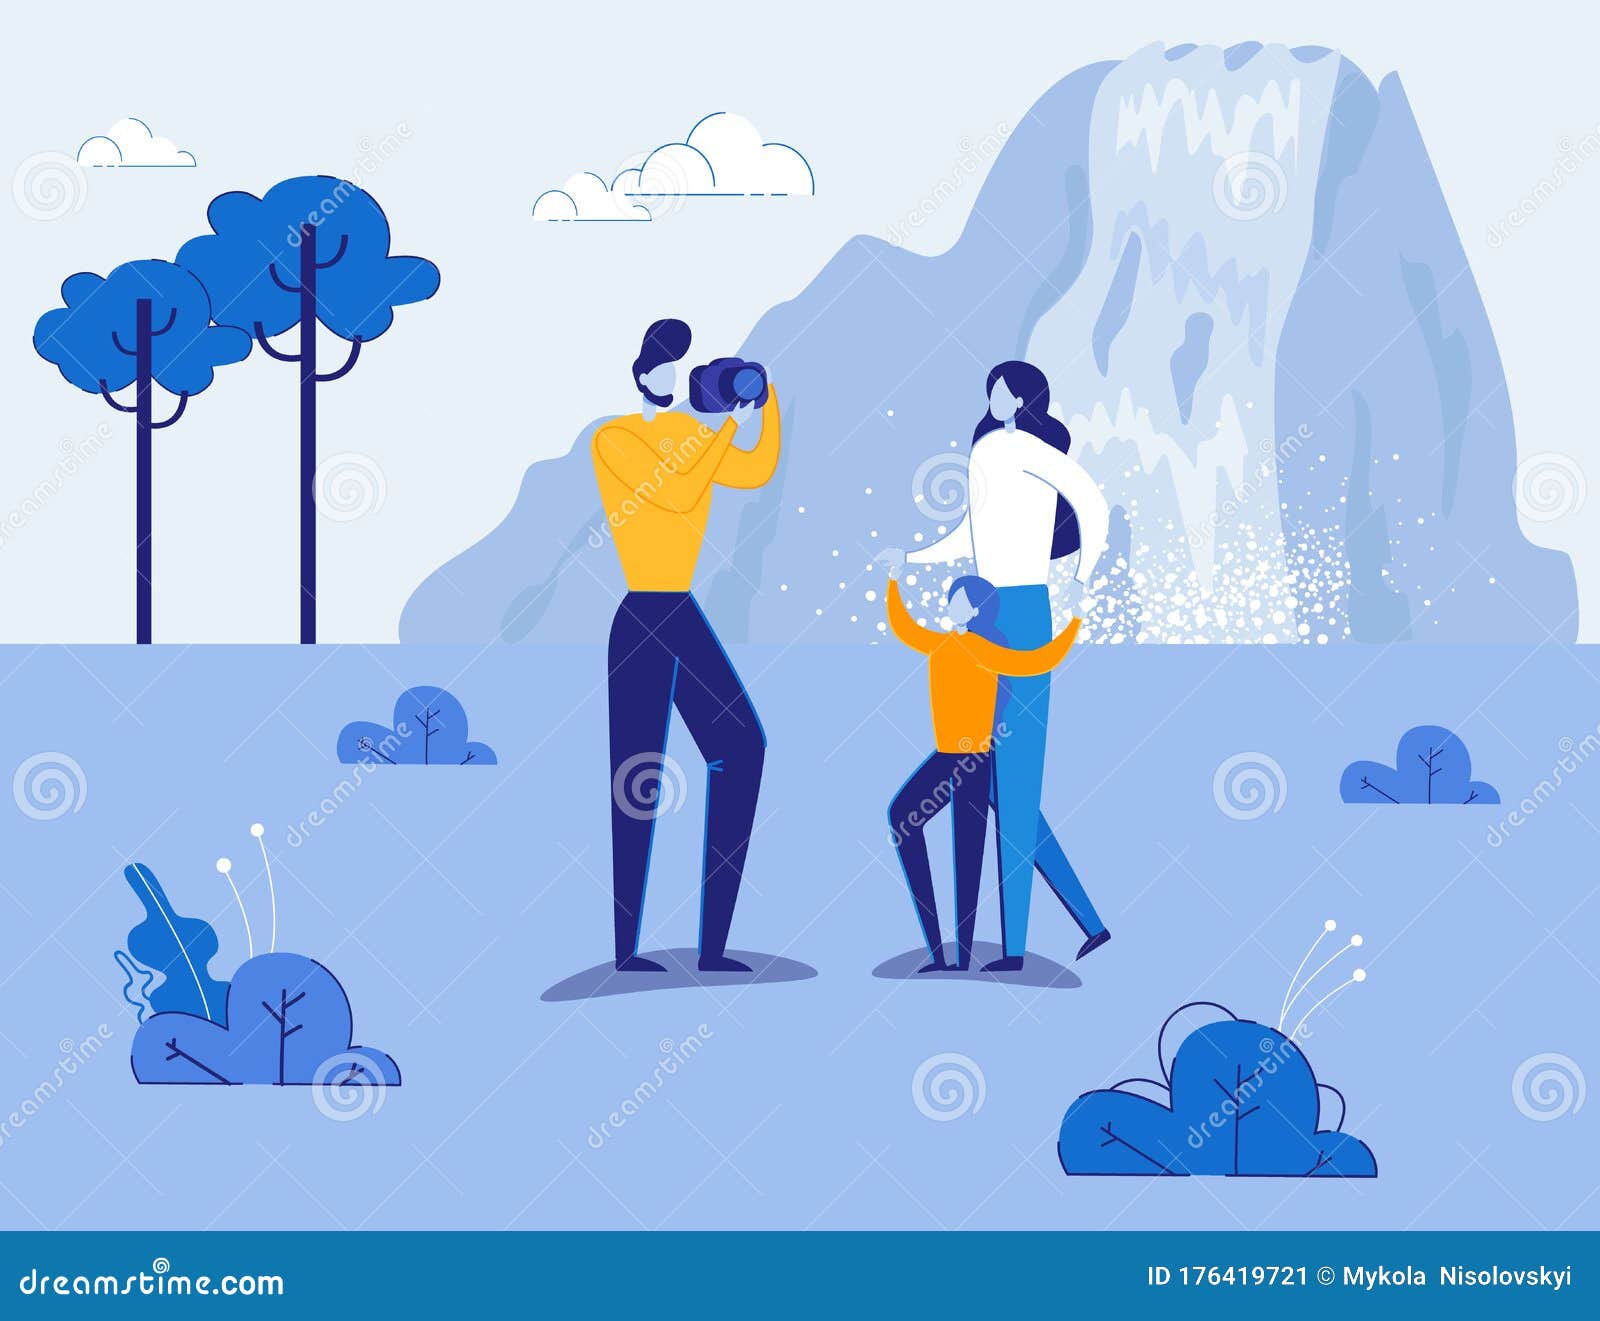 Family Travelers Take Photo on Waterfall Backdrop. Stock Vector ...